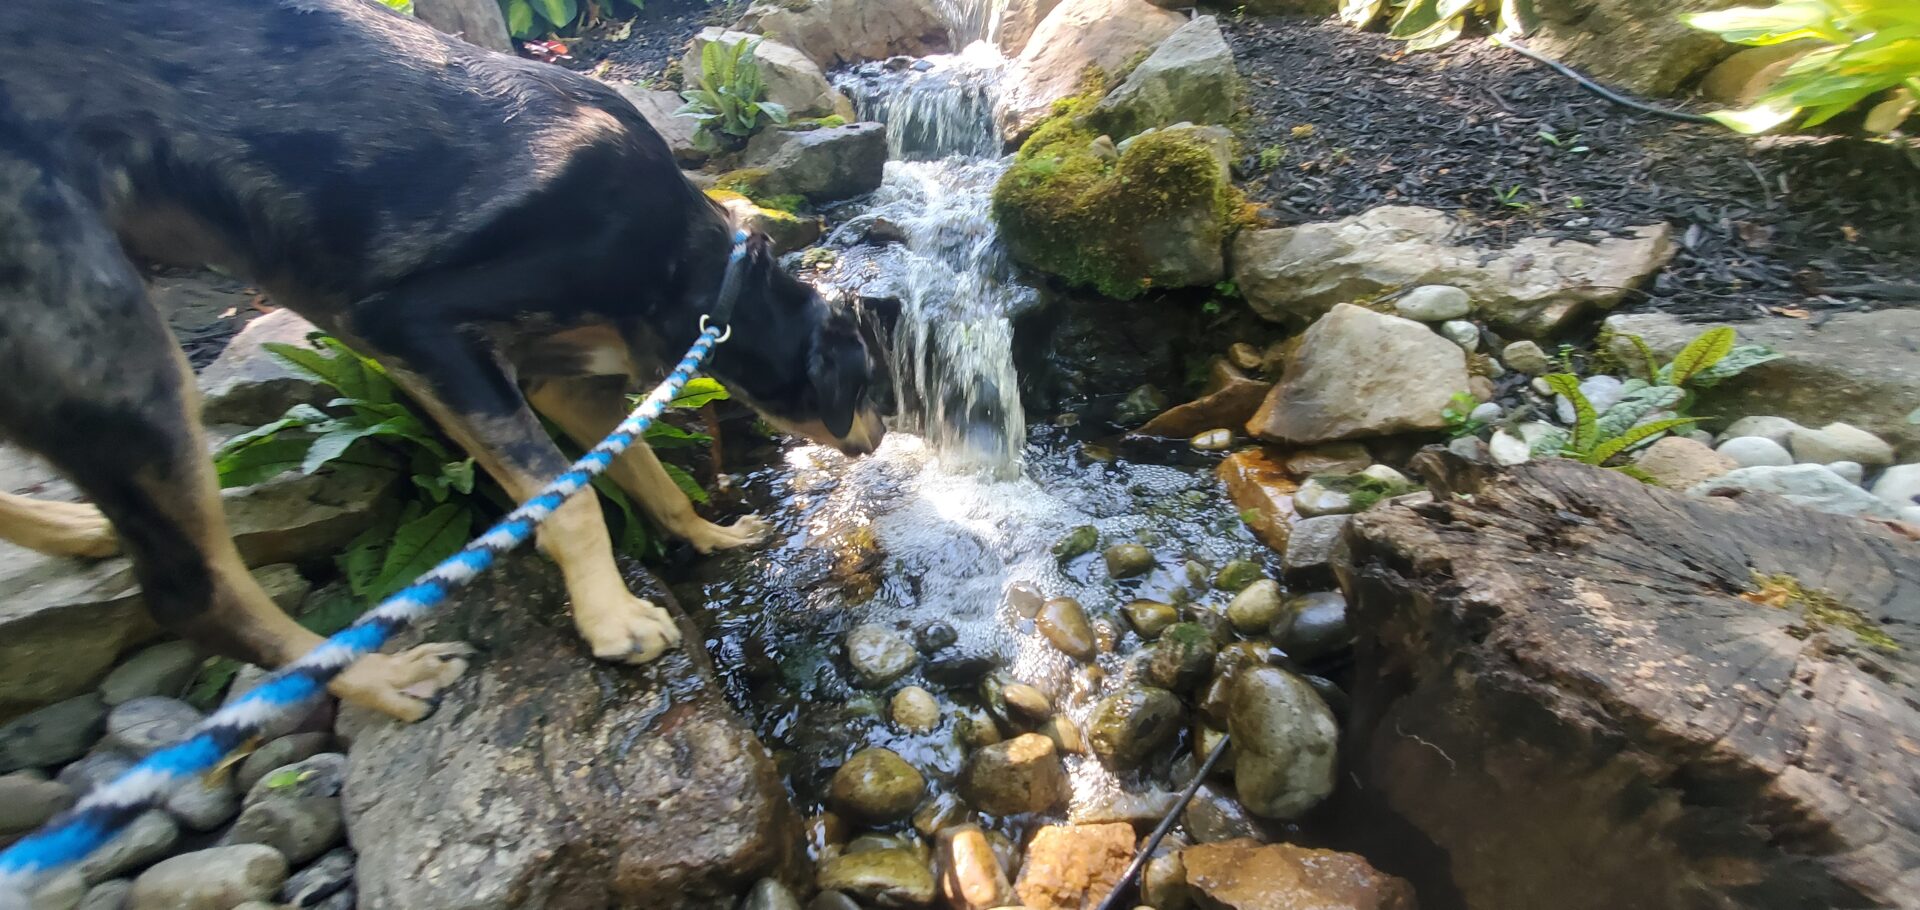 A dog looking at a small waterfall